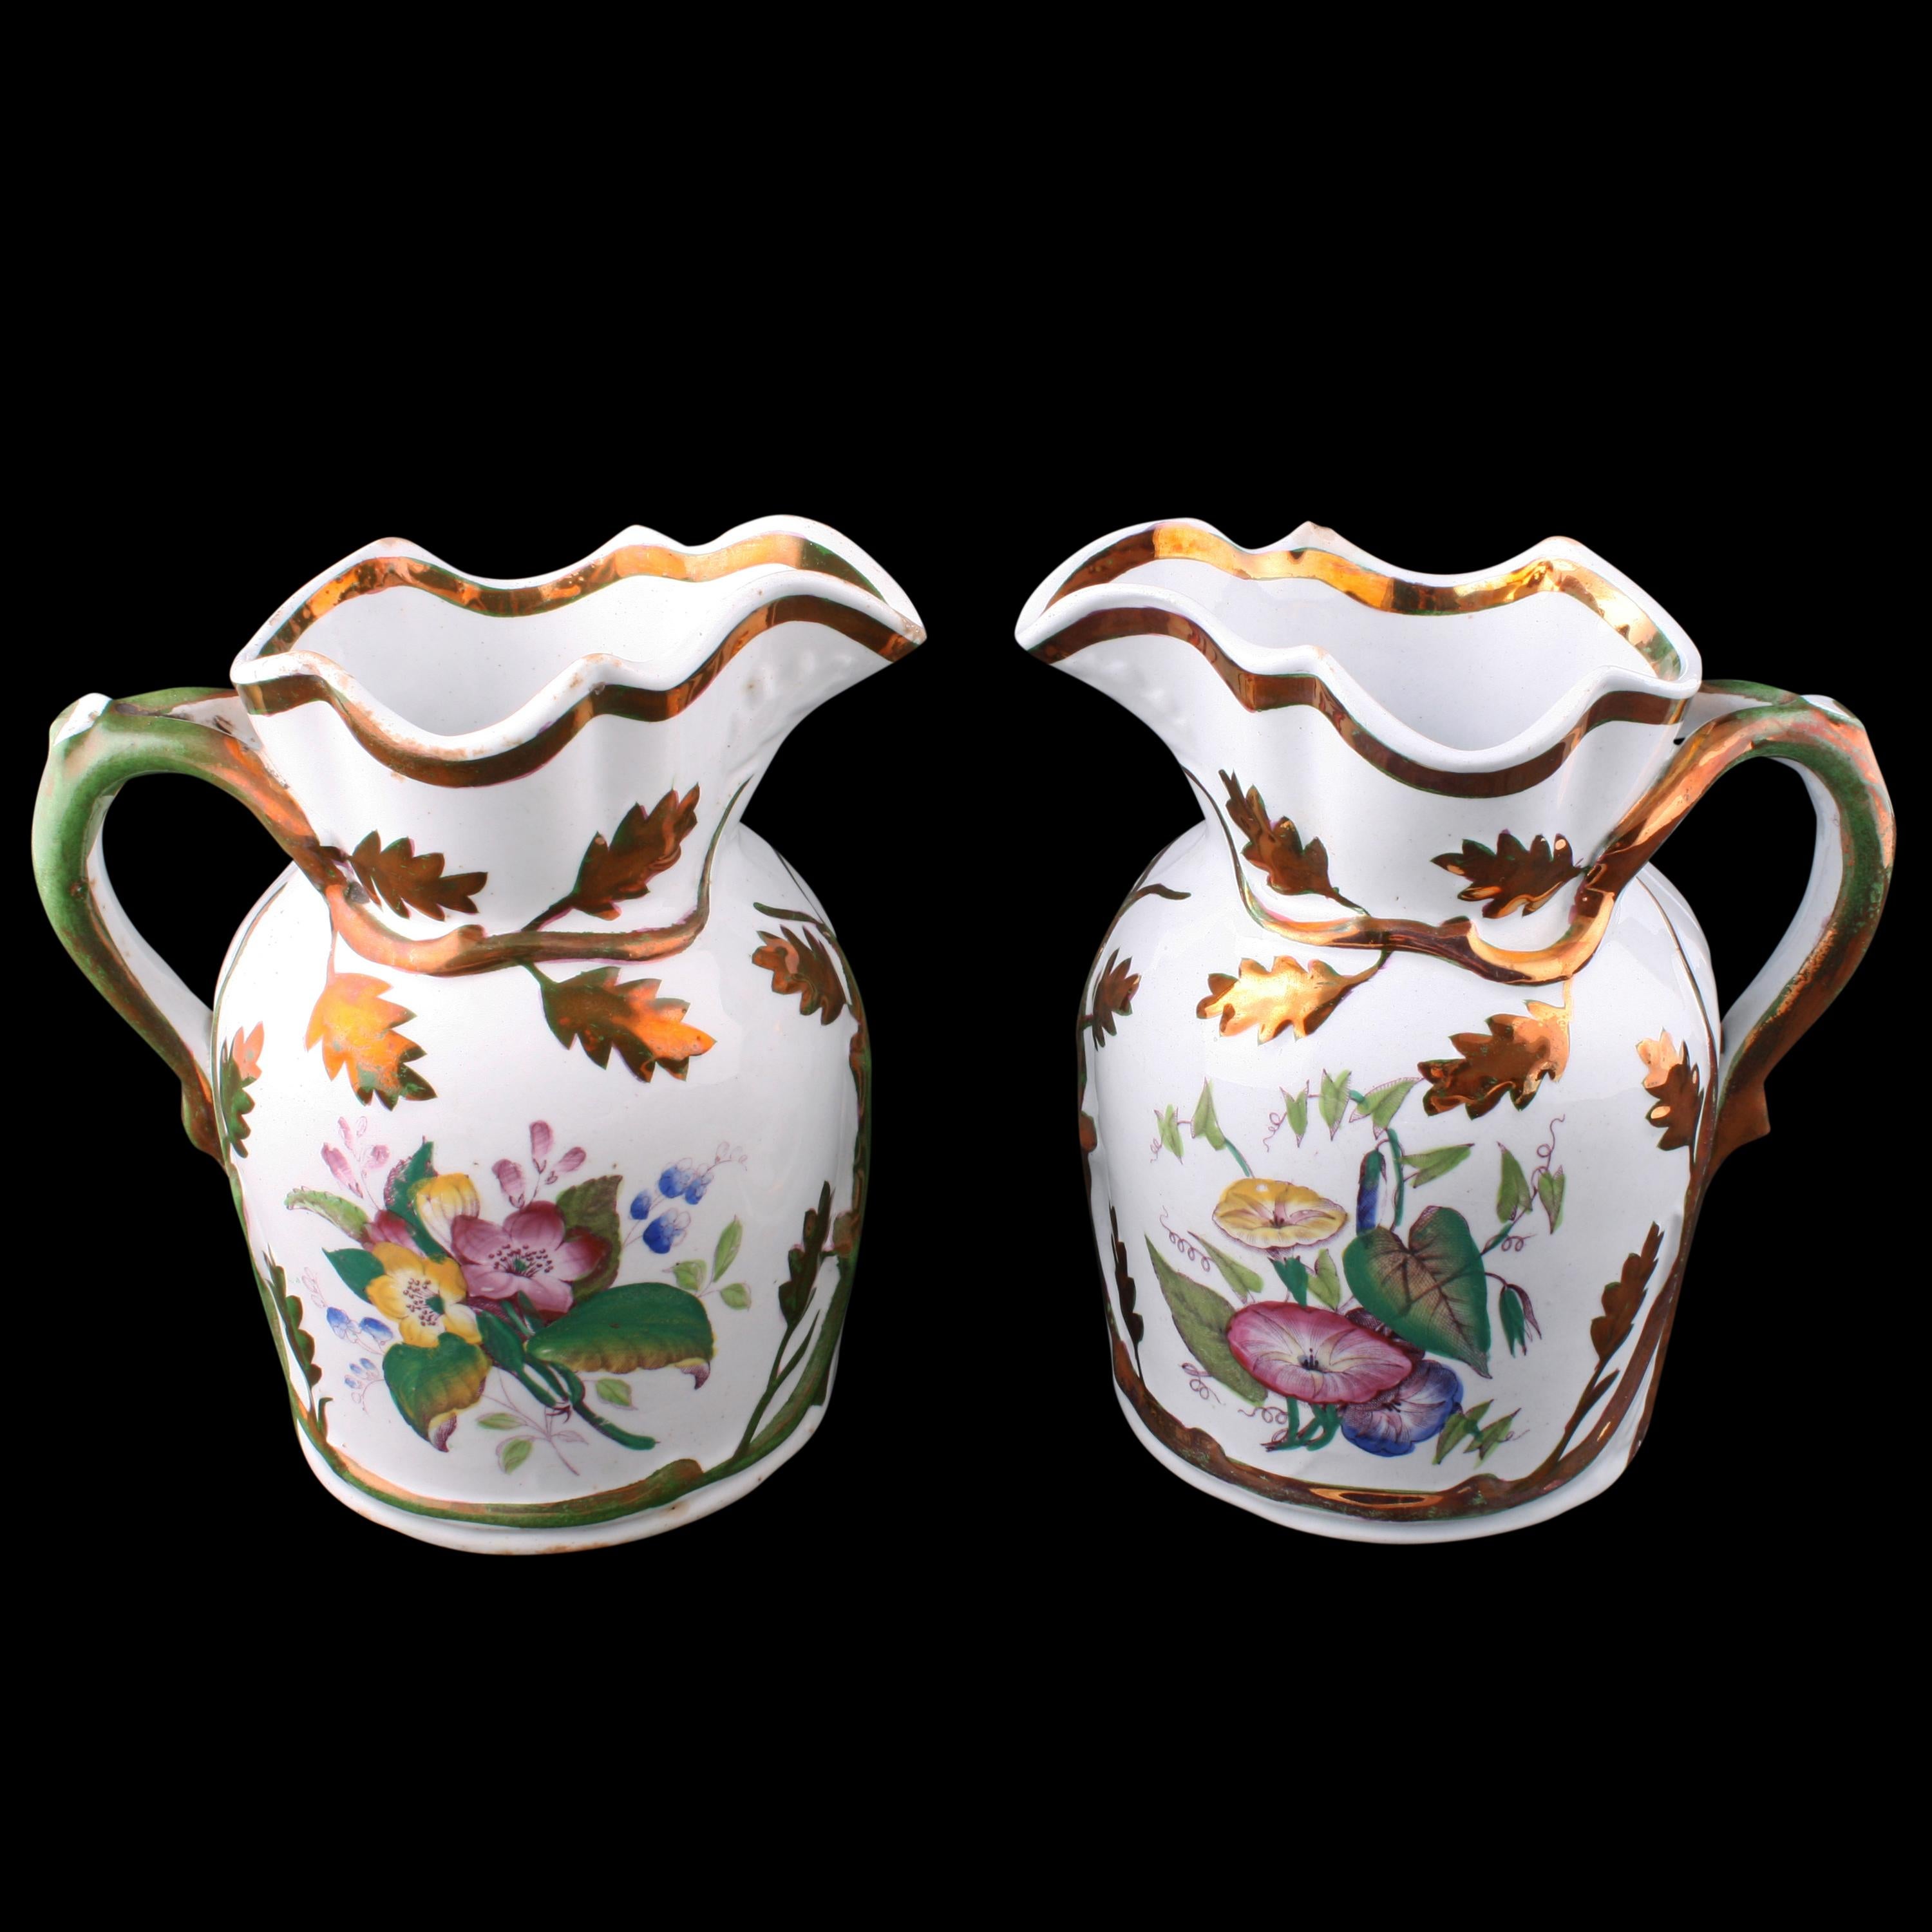 Rococo Collection of 11 Livesley Powell & Co. Ironstone Jugs For Sale